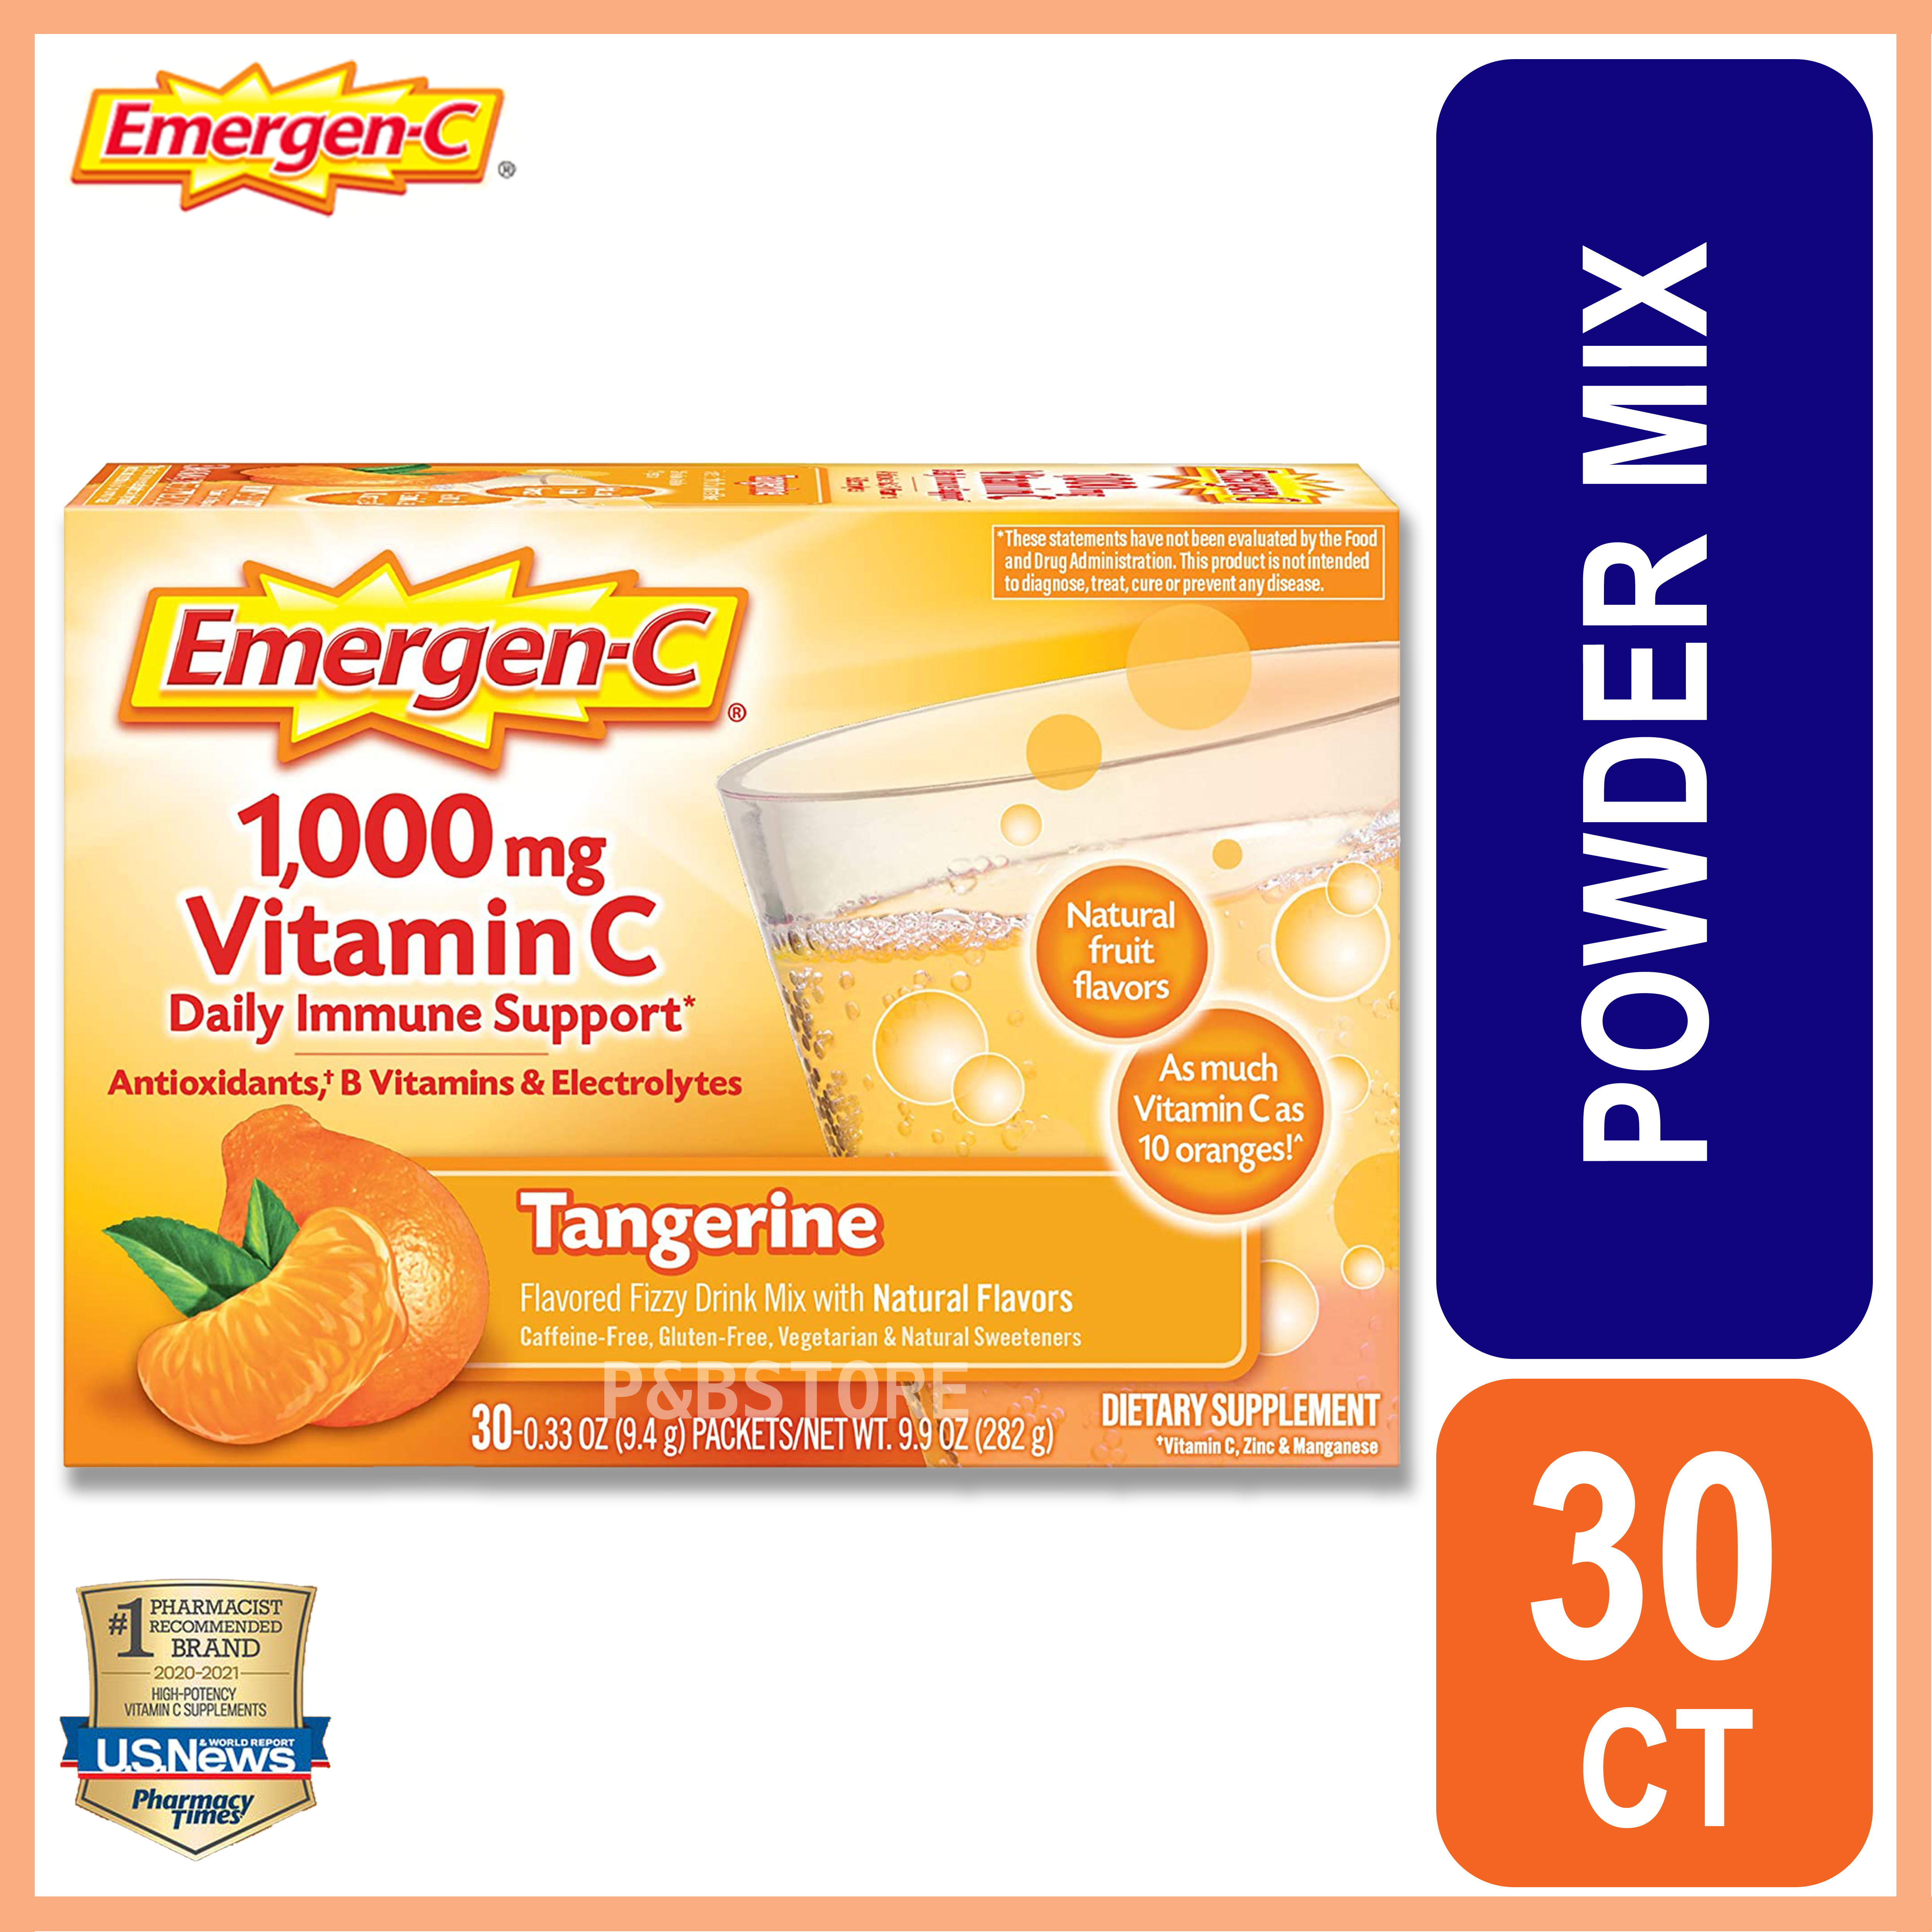 Emergen-C 1000mg Vitamin C Powder for Daily Immune Support Caffeine Free  Vitamin C Supplements with Zinc and Manganese, B Vitamins and Electrolytes